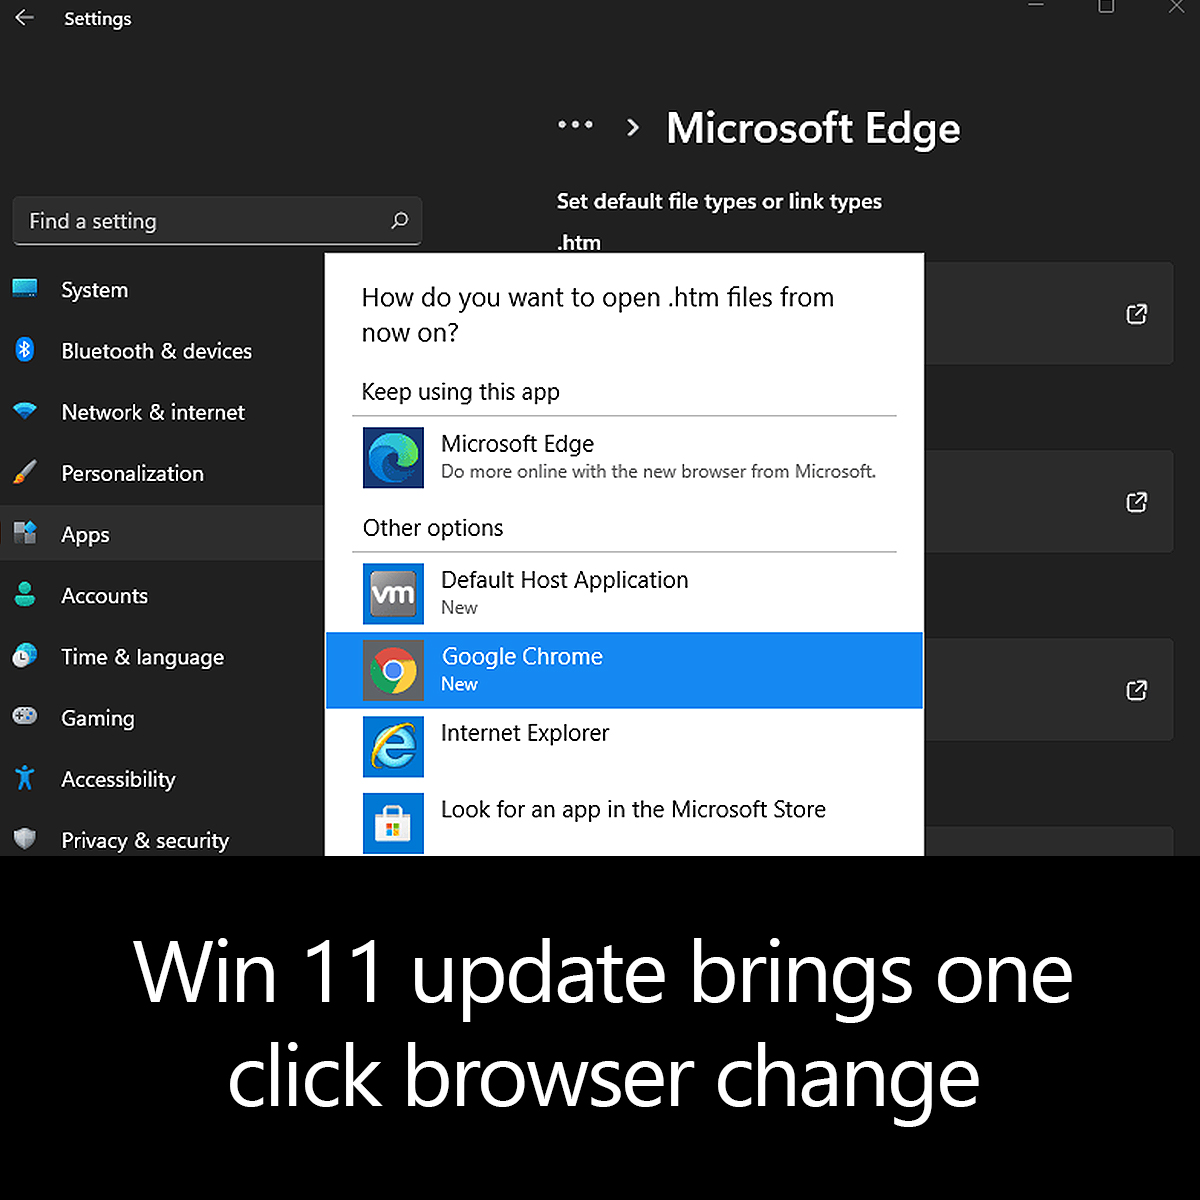 Win 11 update brings one click browser change